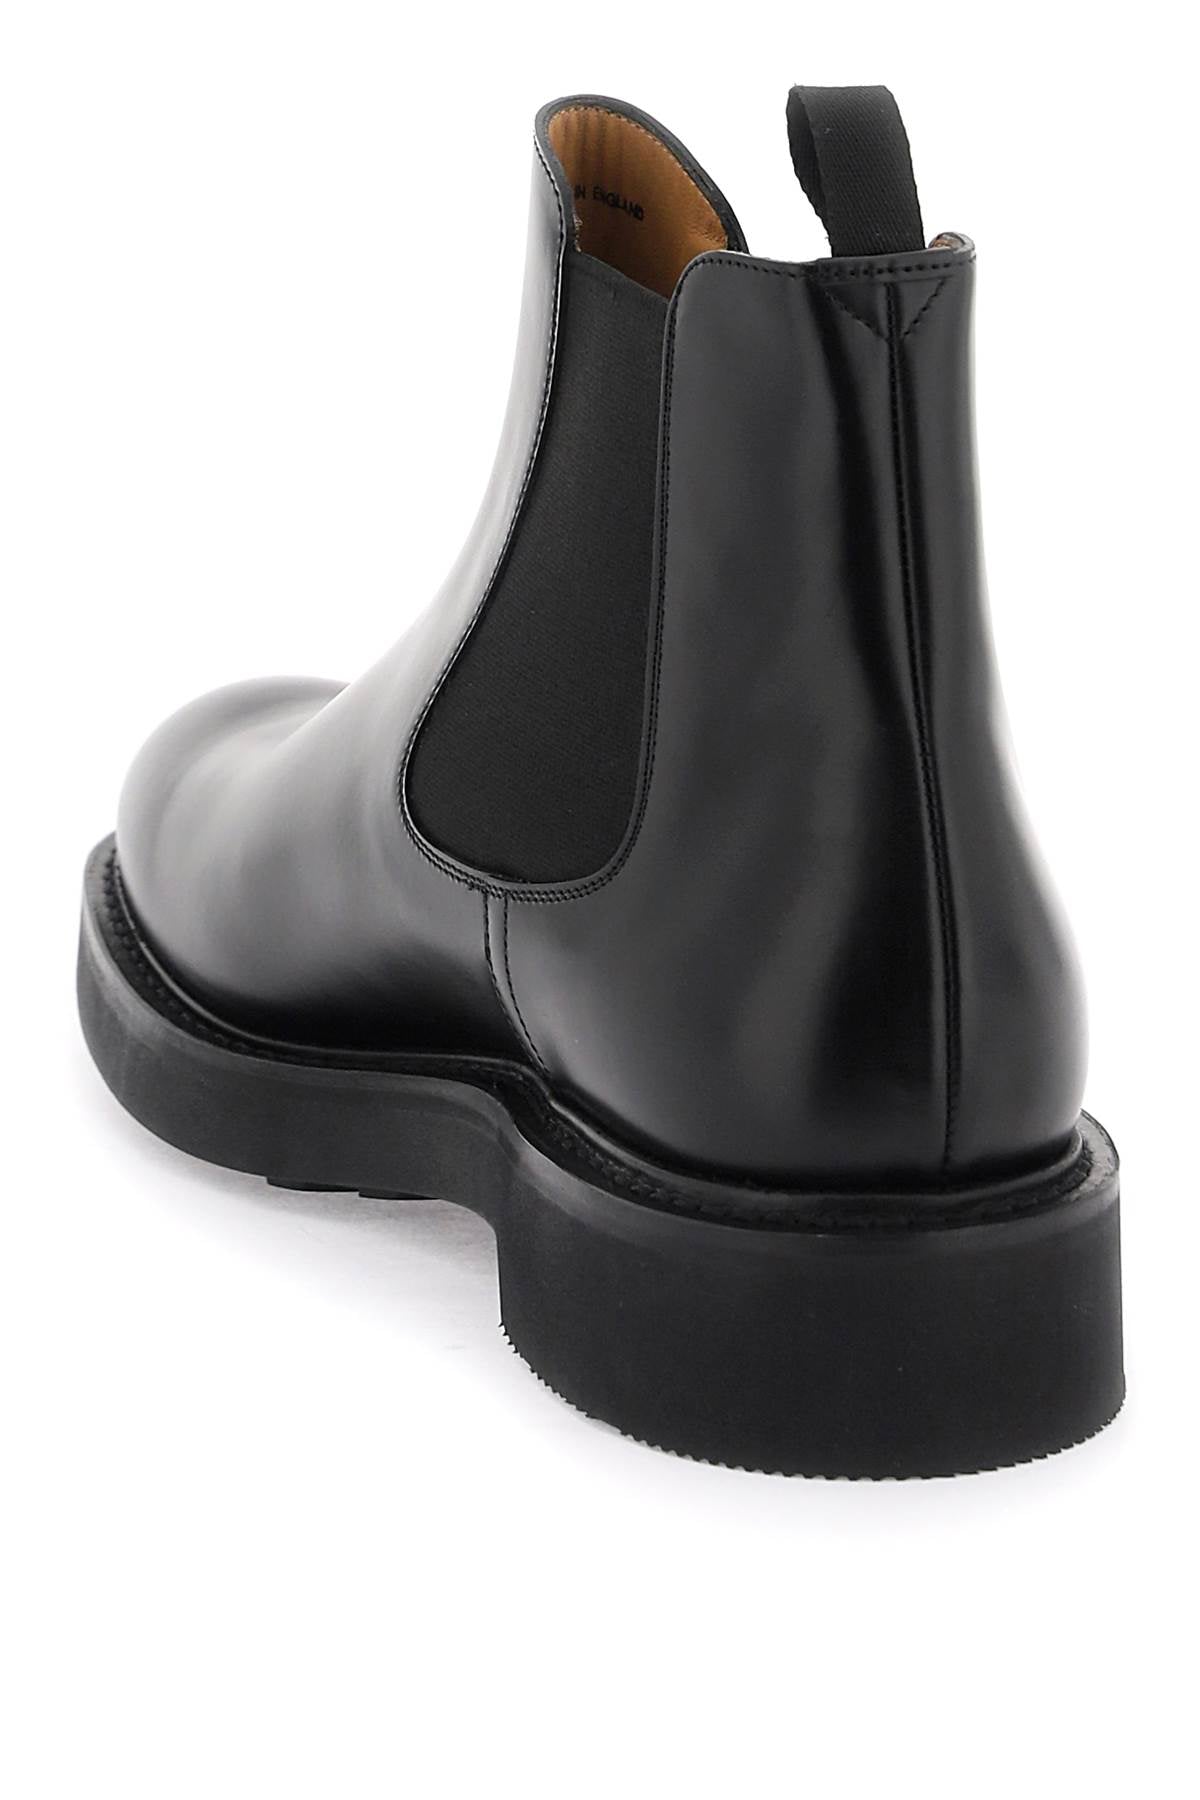 Shop Church's Semi-gloss Leather Chelsea Boots For Men In Classic Black